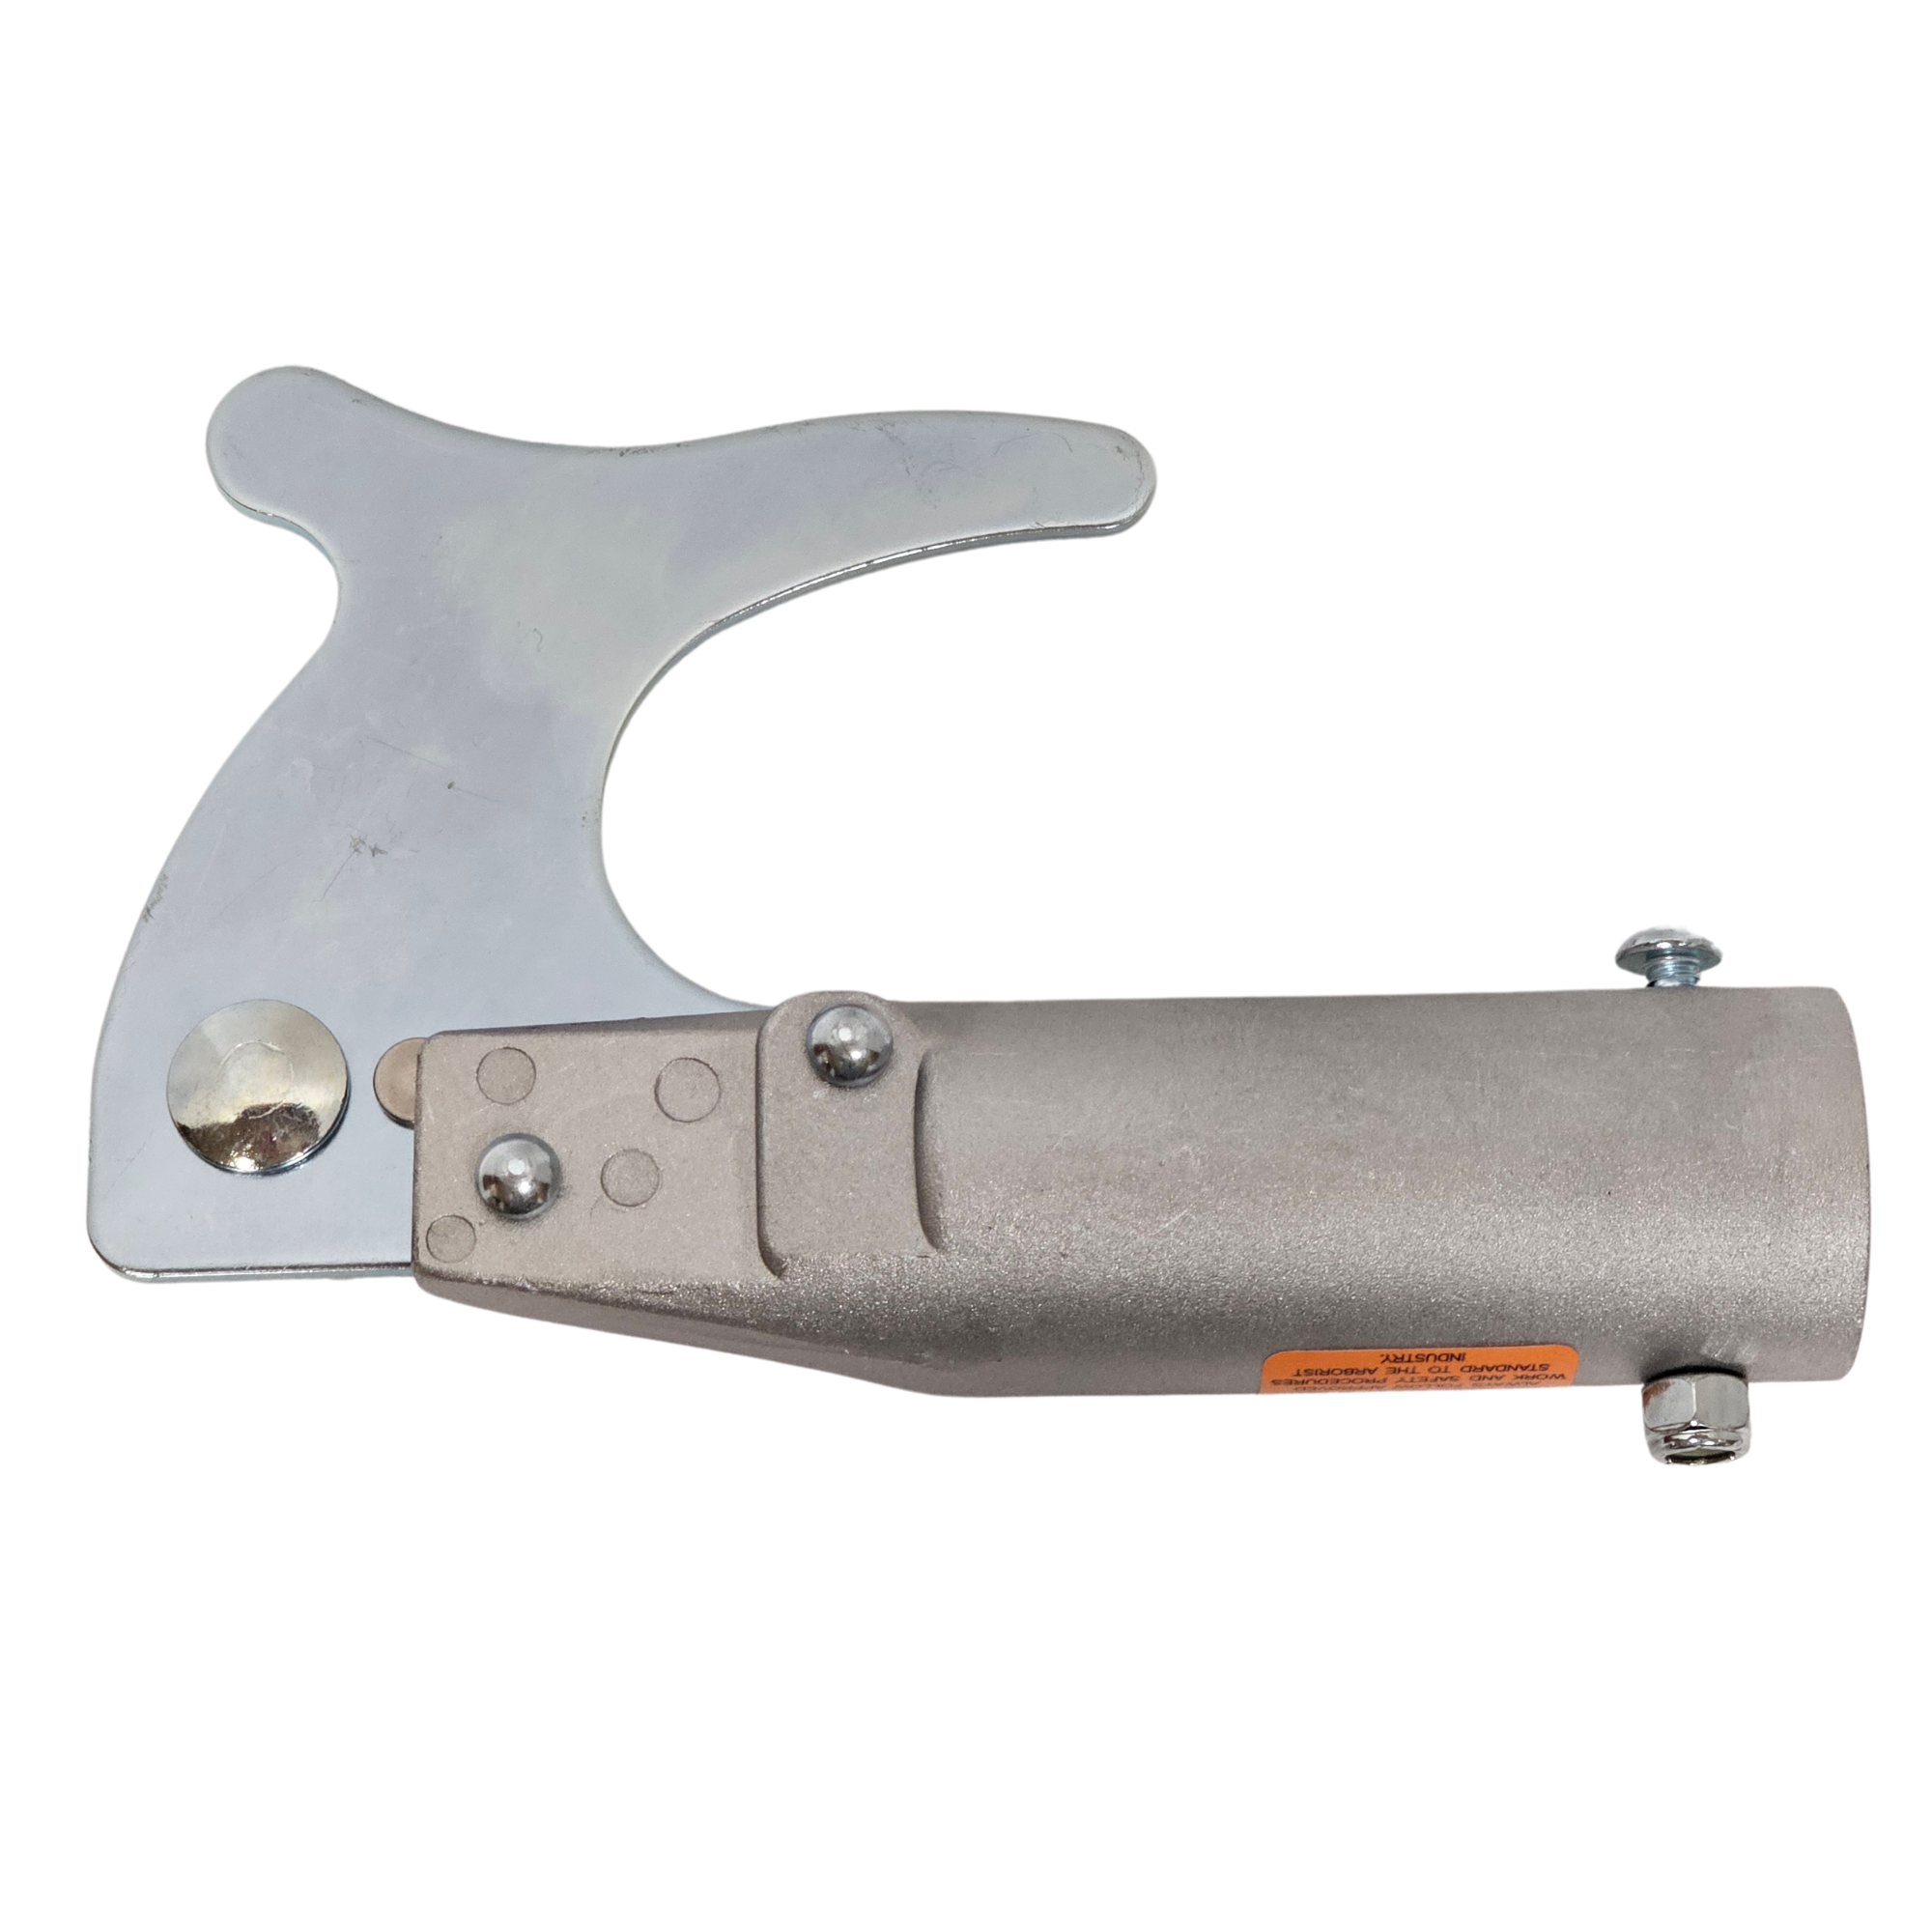 Stihl Saw Head Assembly for PP 900 | 0000 882 4400